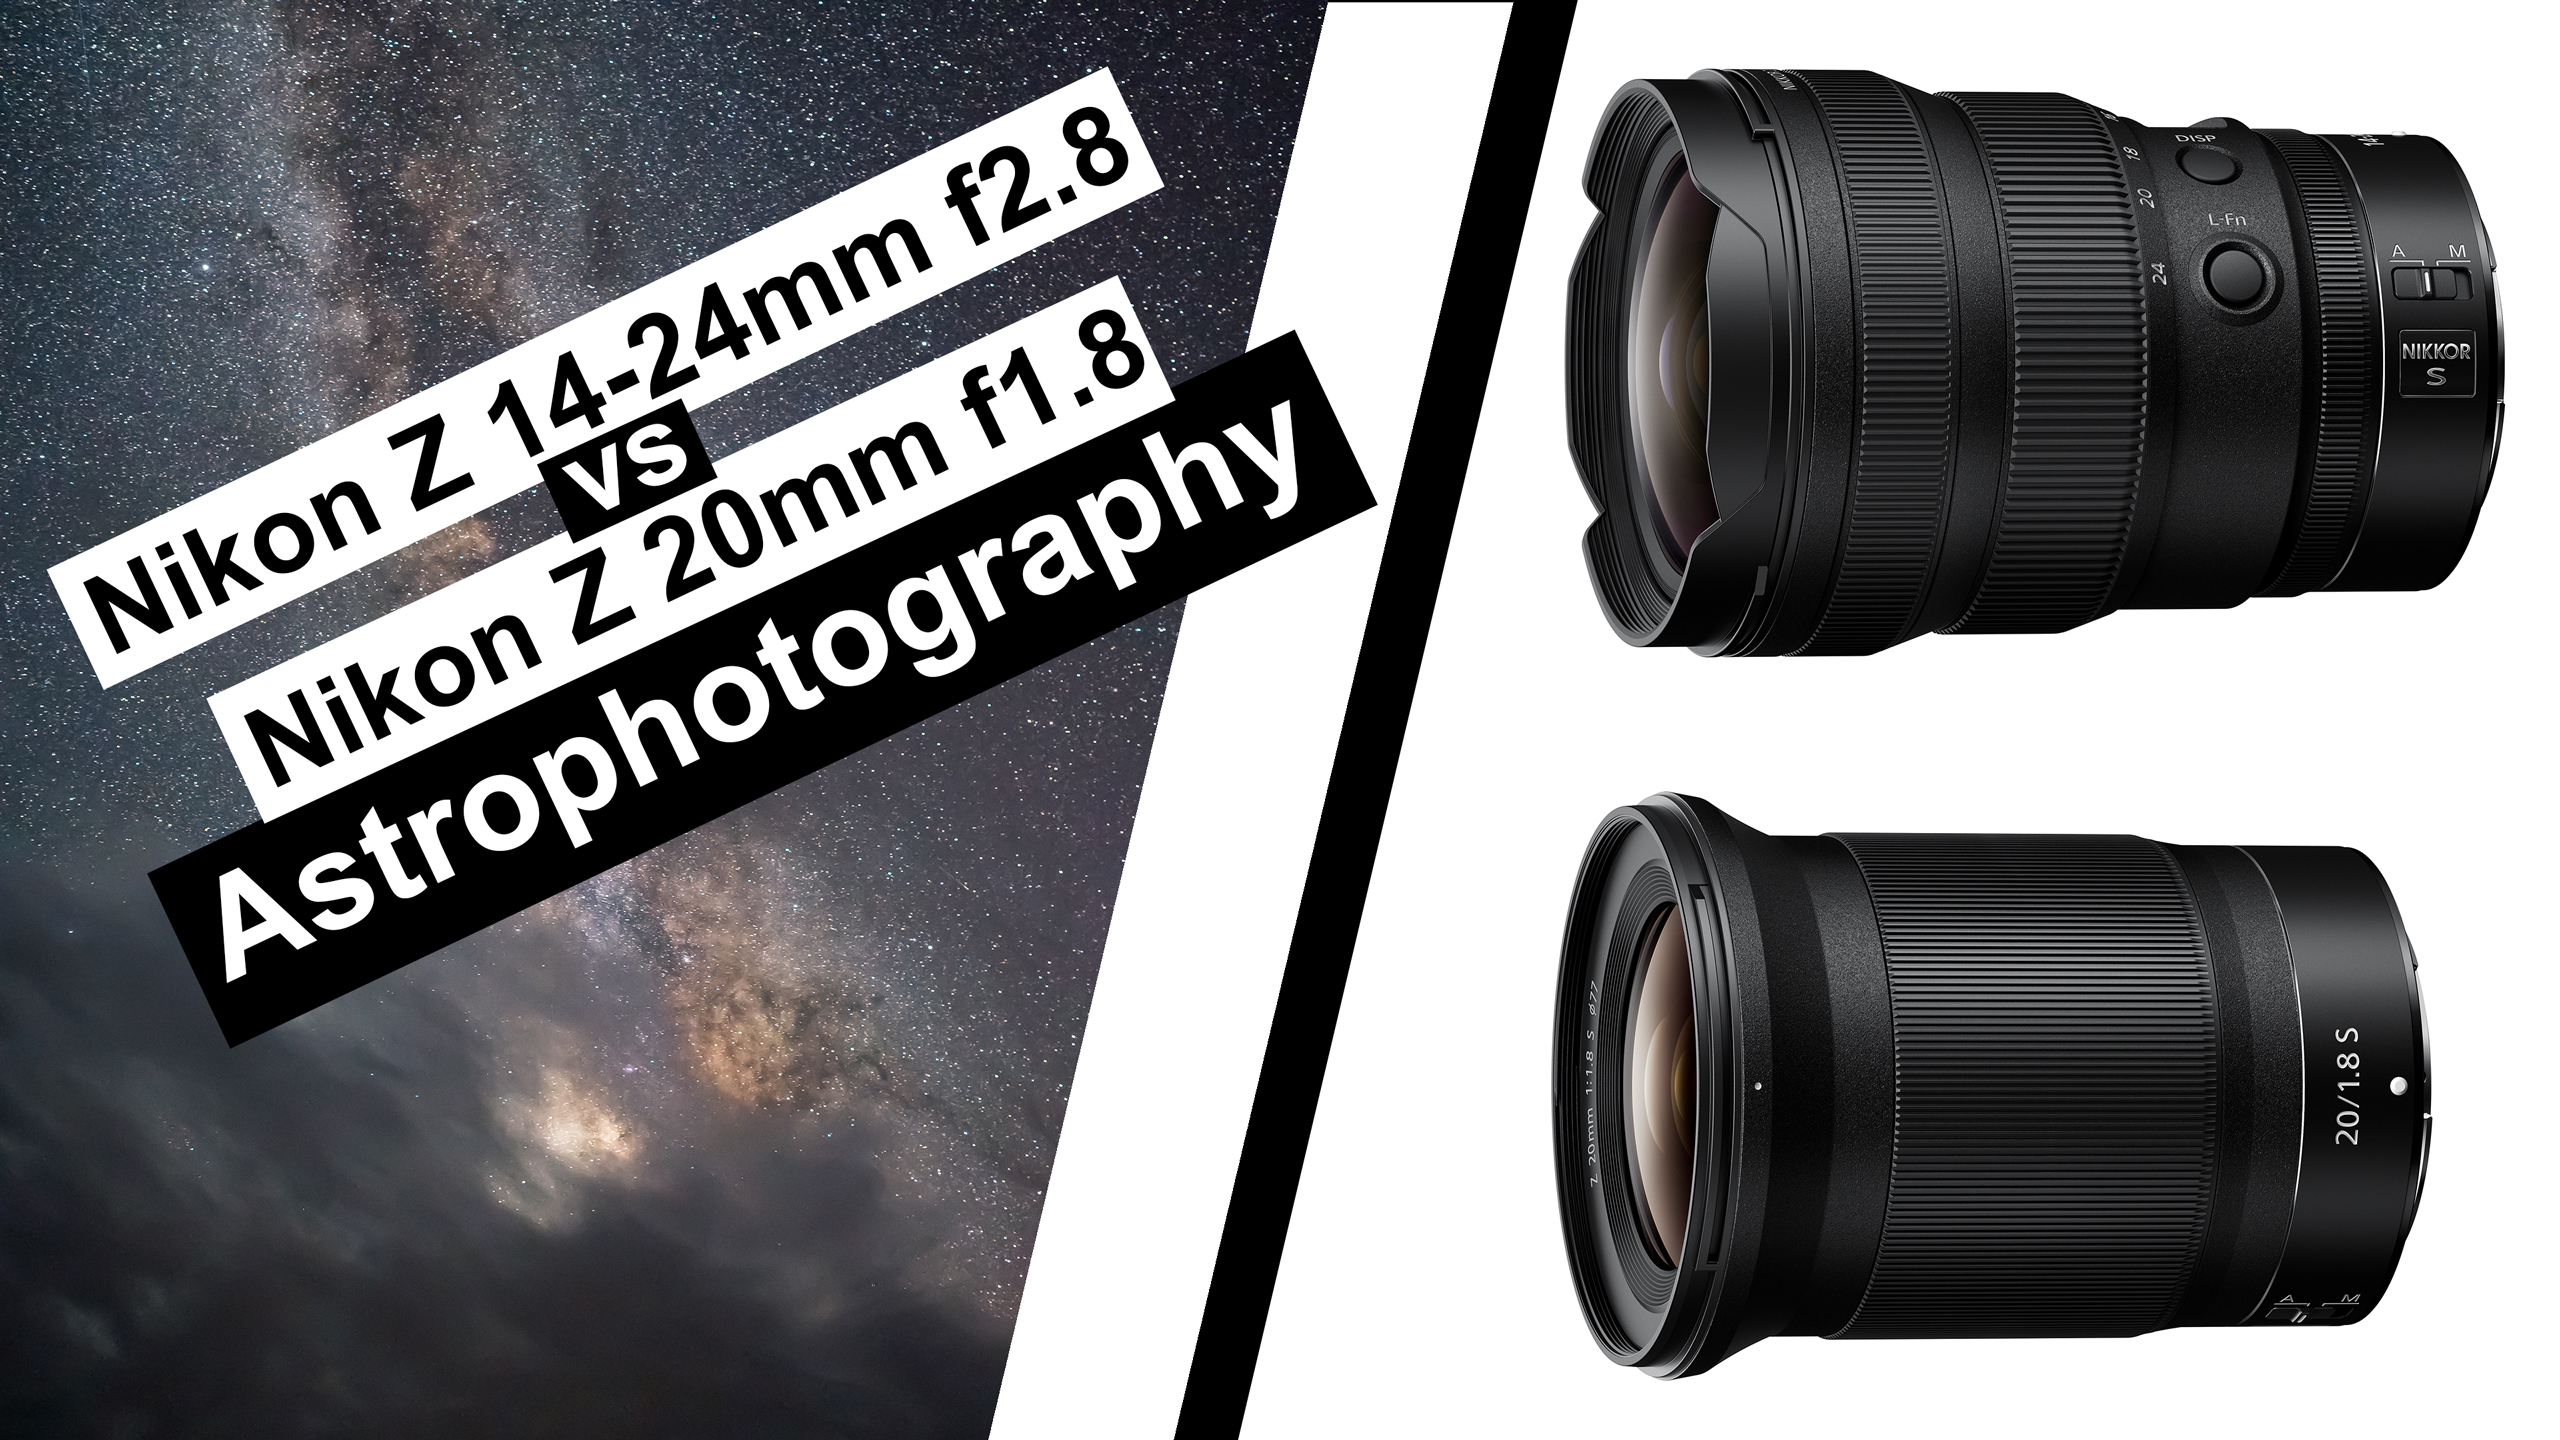 An astrophotography image of the milky way, an image of the Nikon Z 14-24mm f/2.8 S lens, and an image of the Nikon Z 20mm f/1.8 S Lens with the words Nikon Z 14-24mm f2.8 vx Nikon Z 20mm f/1.8 Astrophotograpy overlaid.